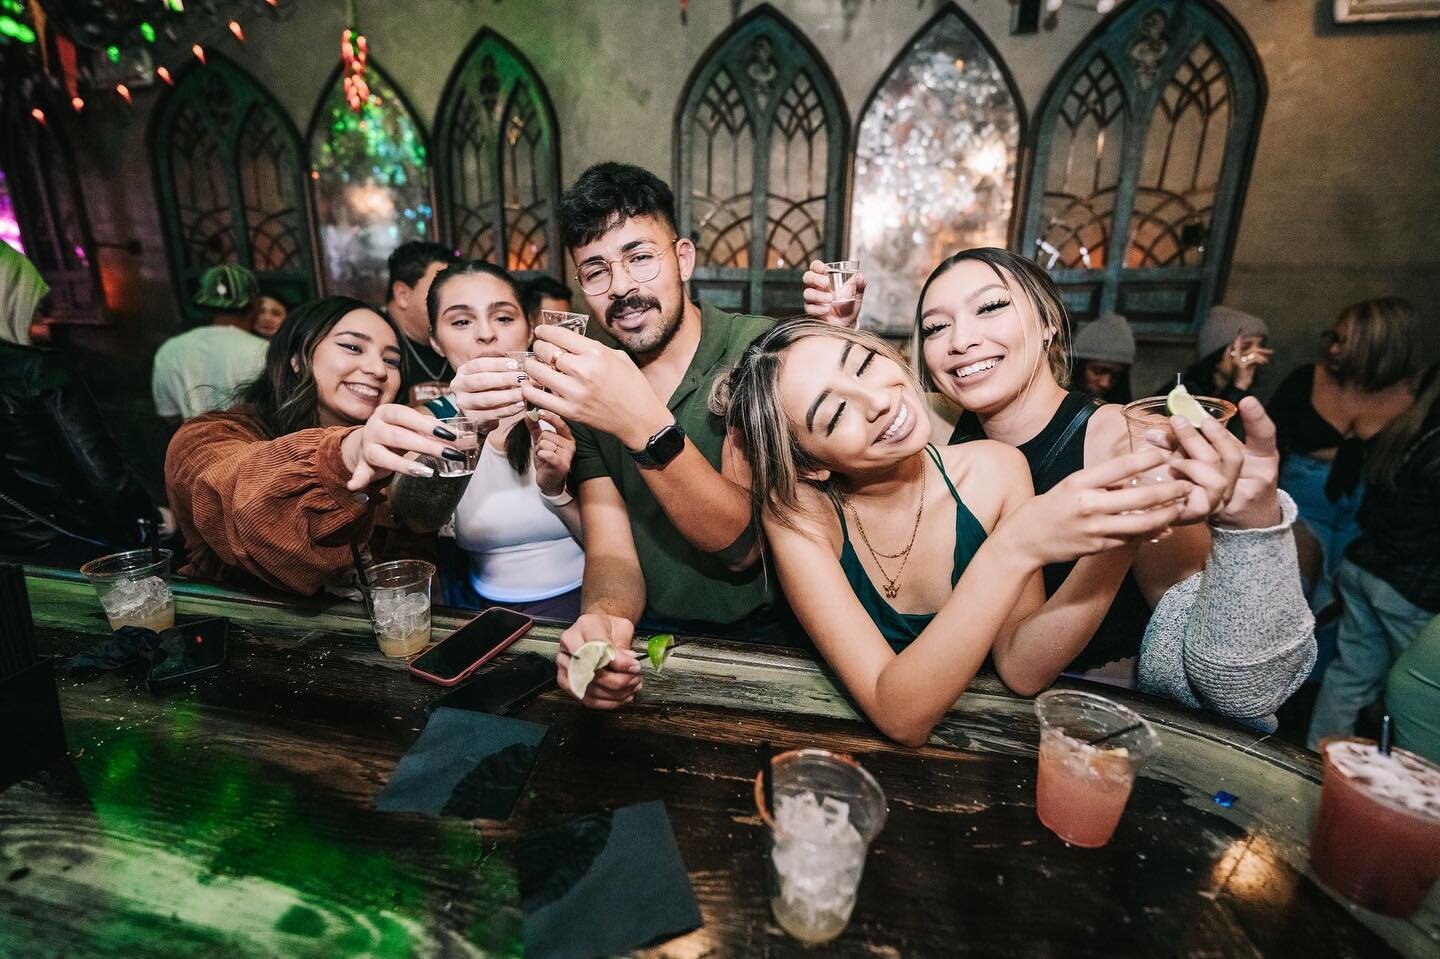 We only drink Tequila on days that end with a Y 📆

LUCKYDAYDTLV.COM

📸: @jessehudsonphoto 

#luckydaydtlv #luckyday #dtlv #downtownlasvegas #fremontstreet #tequila #mezcal #latin #reggaeton #salsa #specialtycocktails